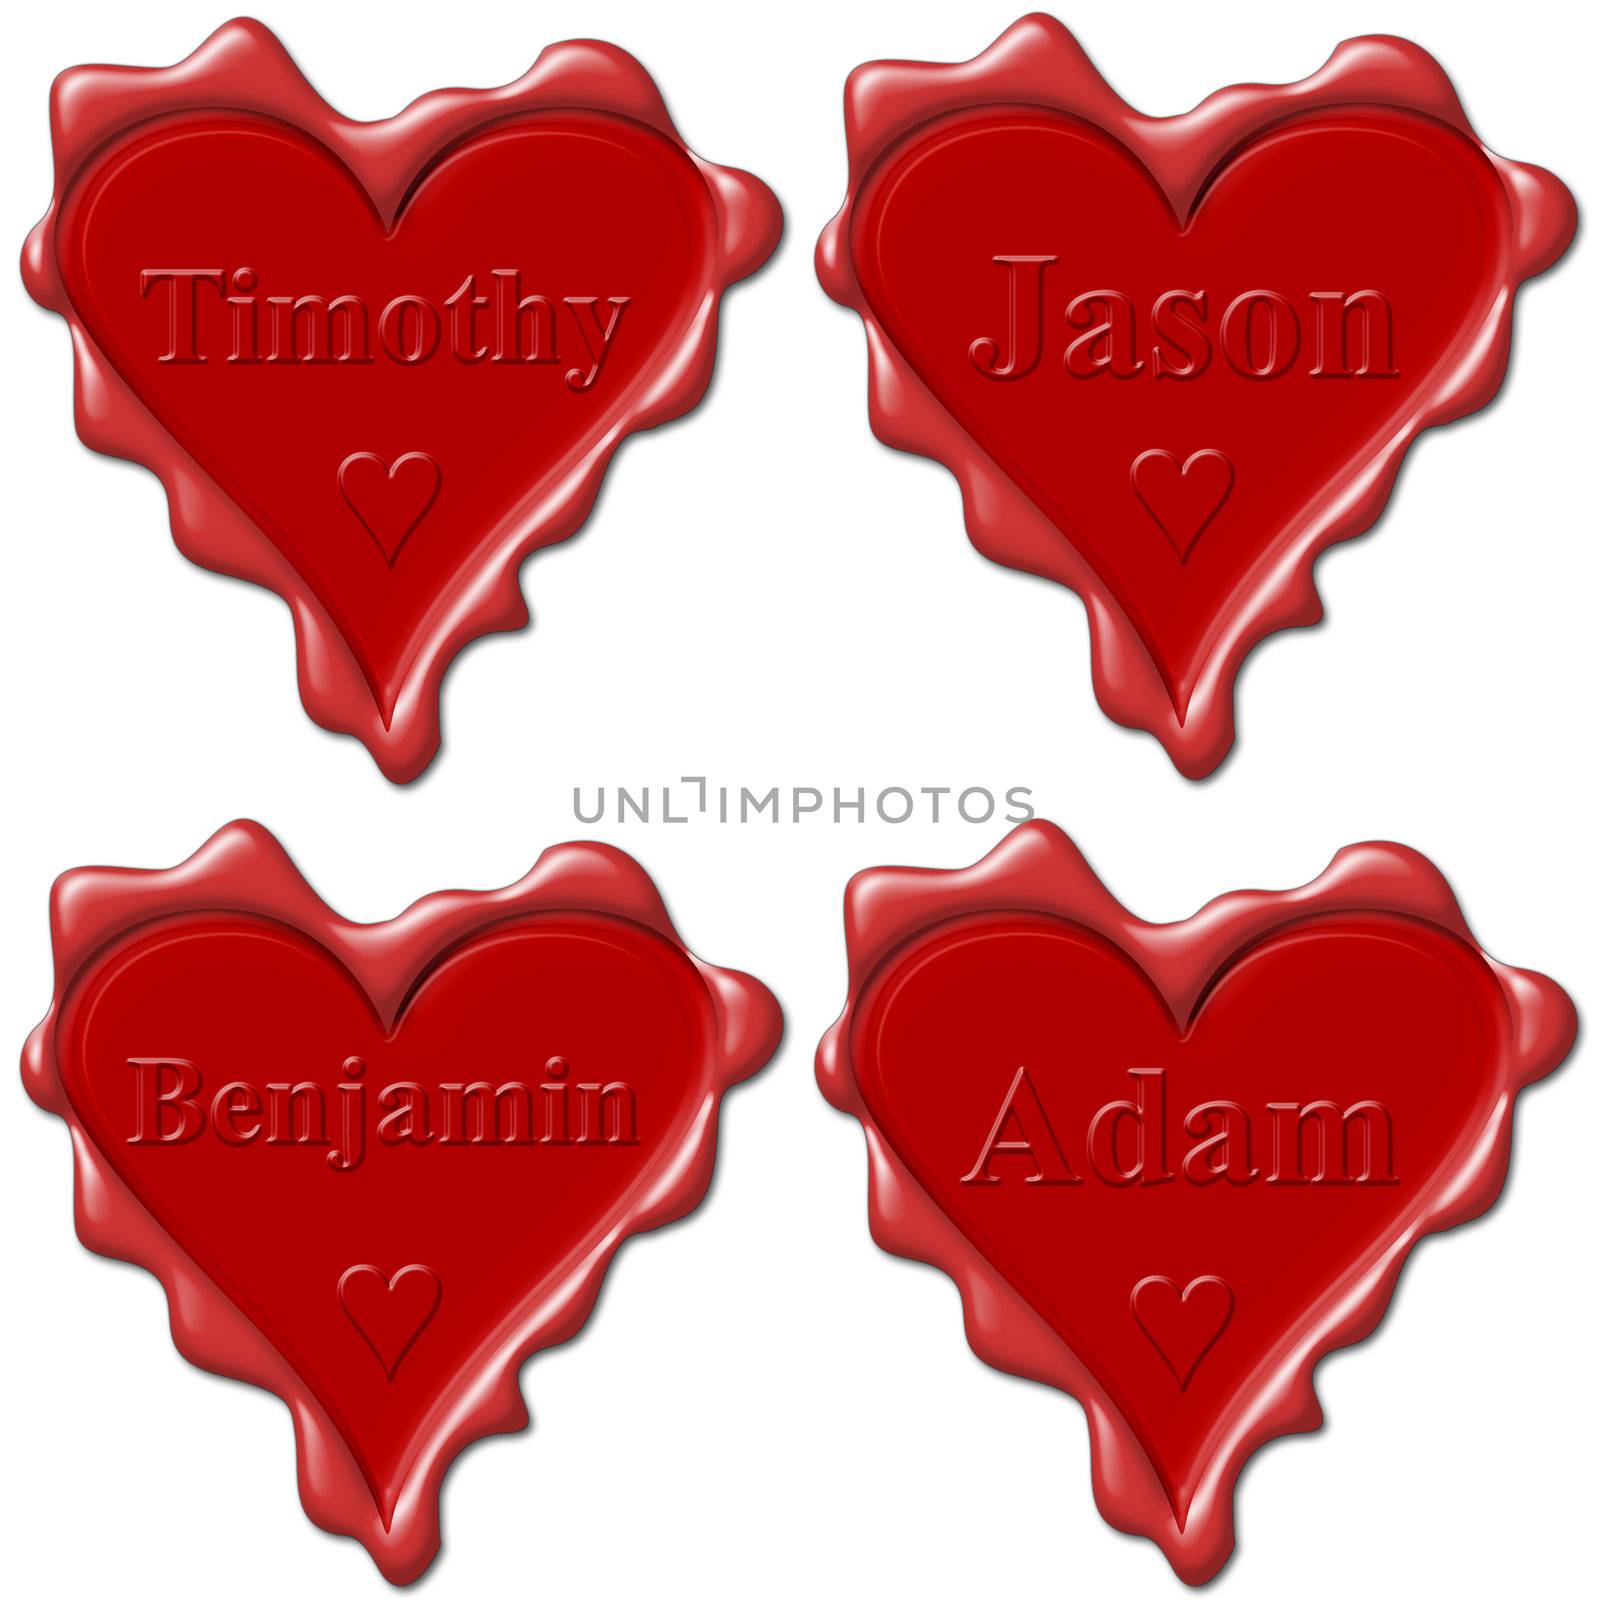 Valentine love hearts with names: Timothy, Jason, Benjamin, Adam by mozzyb